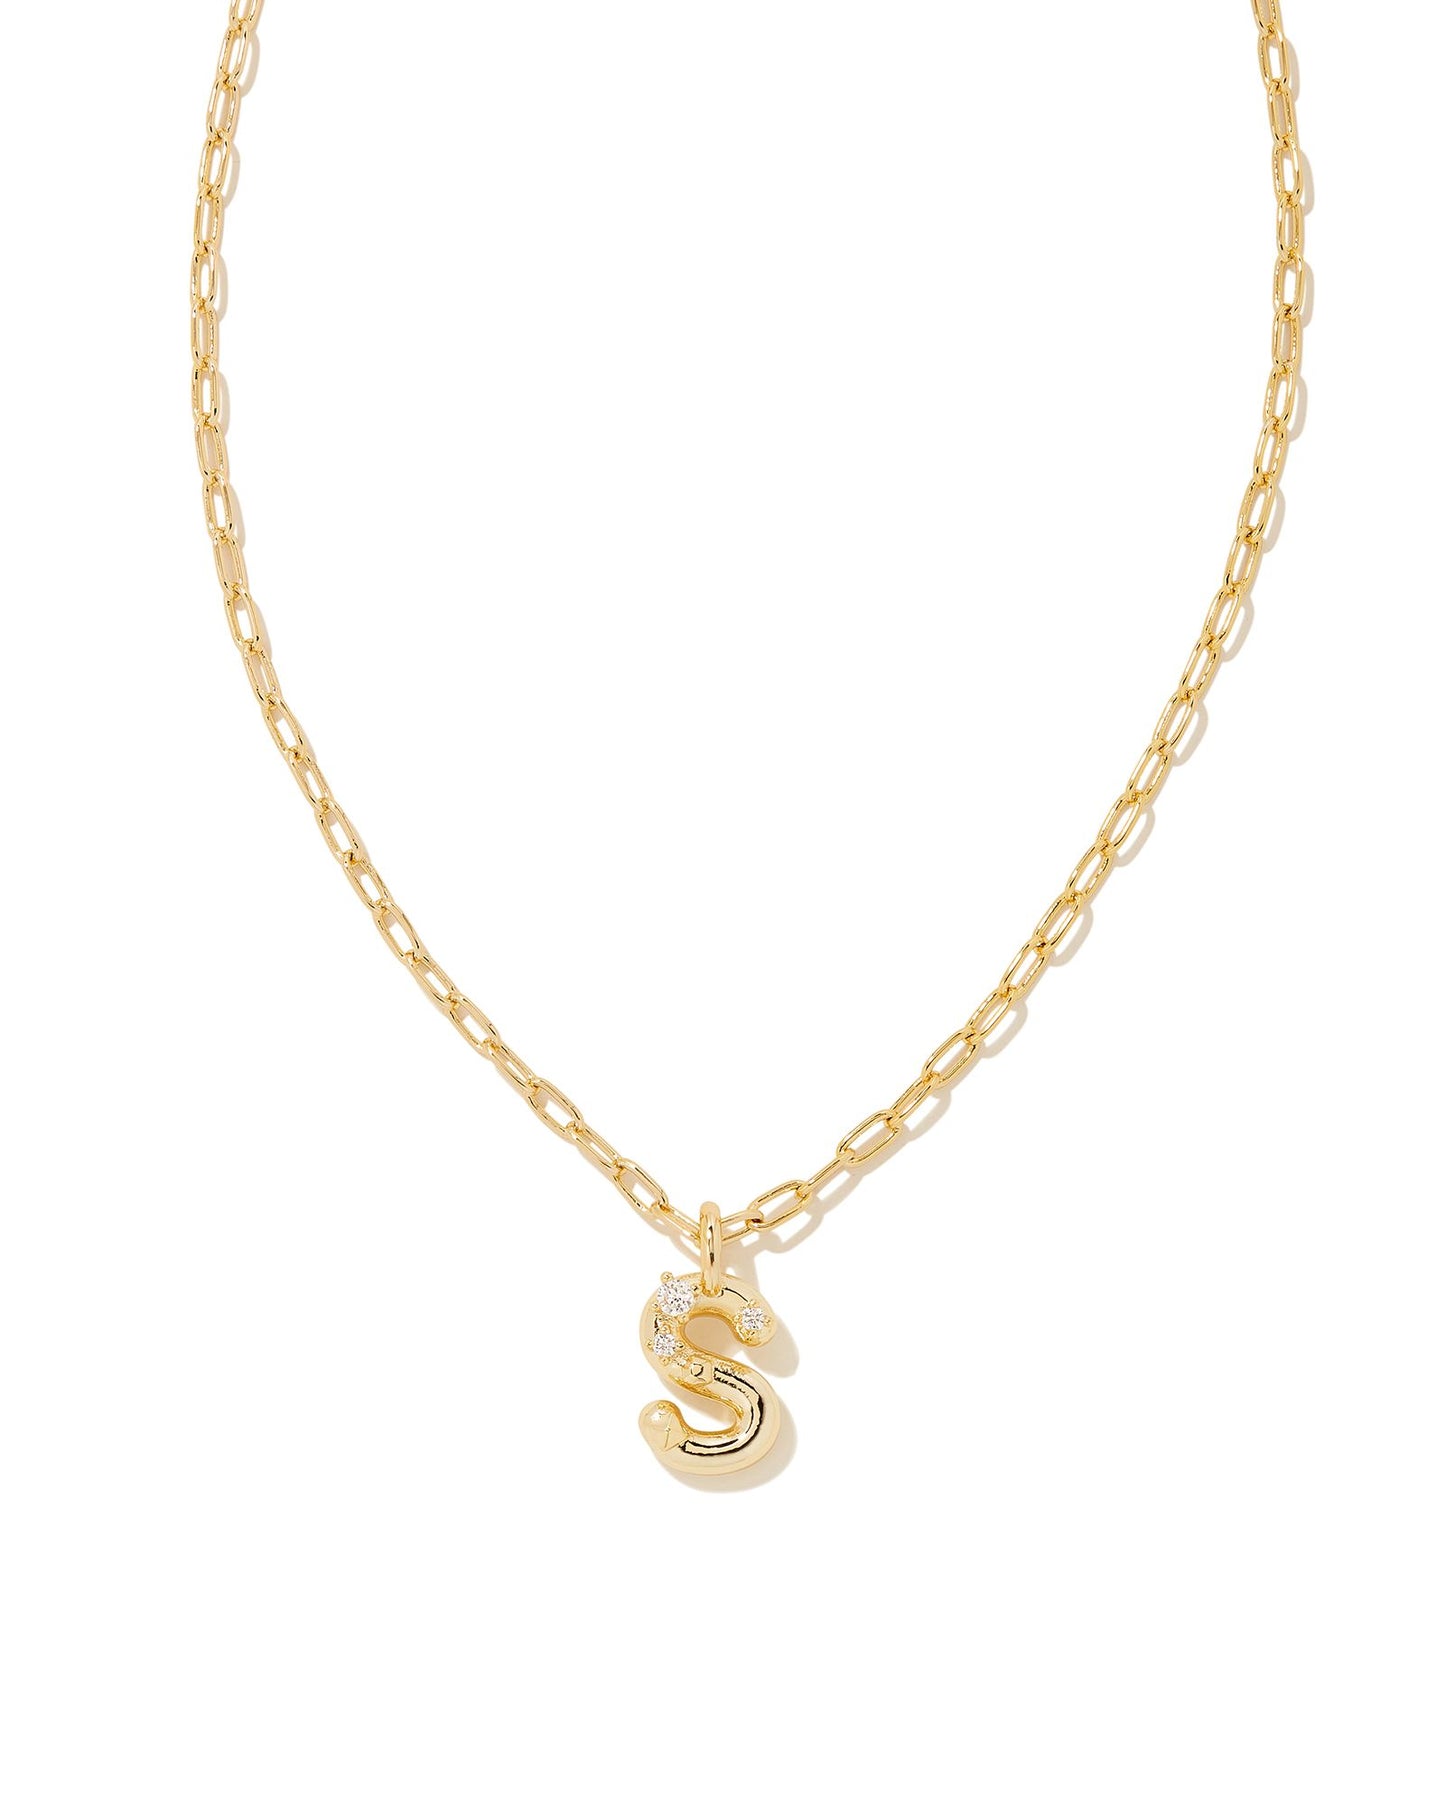 Personalize your everyday look with the Crystal Letter Short Pendant Necklace in White Crystal. Whether you’re rocking your initial or a loved one’s, this sentimental layer is one you’ll keep coming back to again and again.  Dimensions- 16' CHAIN WITH 3' EXTENDER, 0.62'L X 0.35"W PENDANT Metal- 14K Gold plated over brass Closure- Lobster Clasp Material-   White CZ Letter S